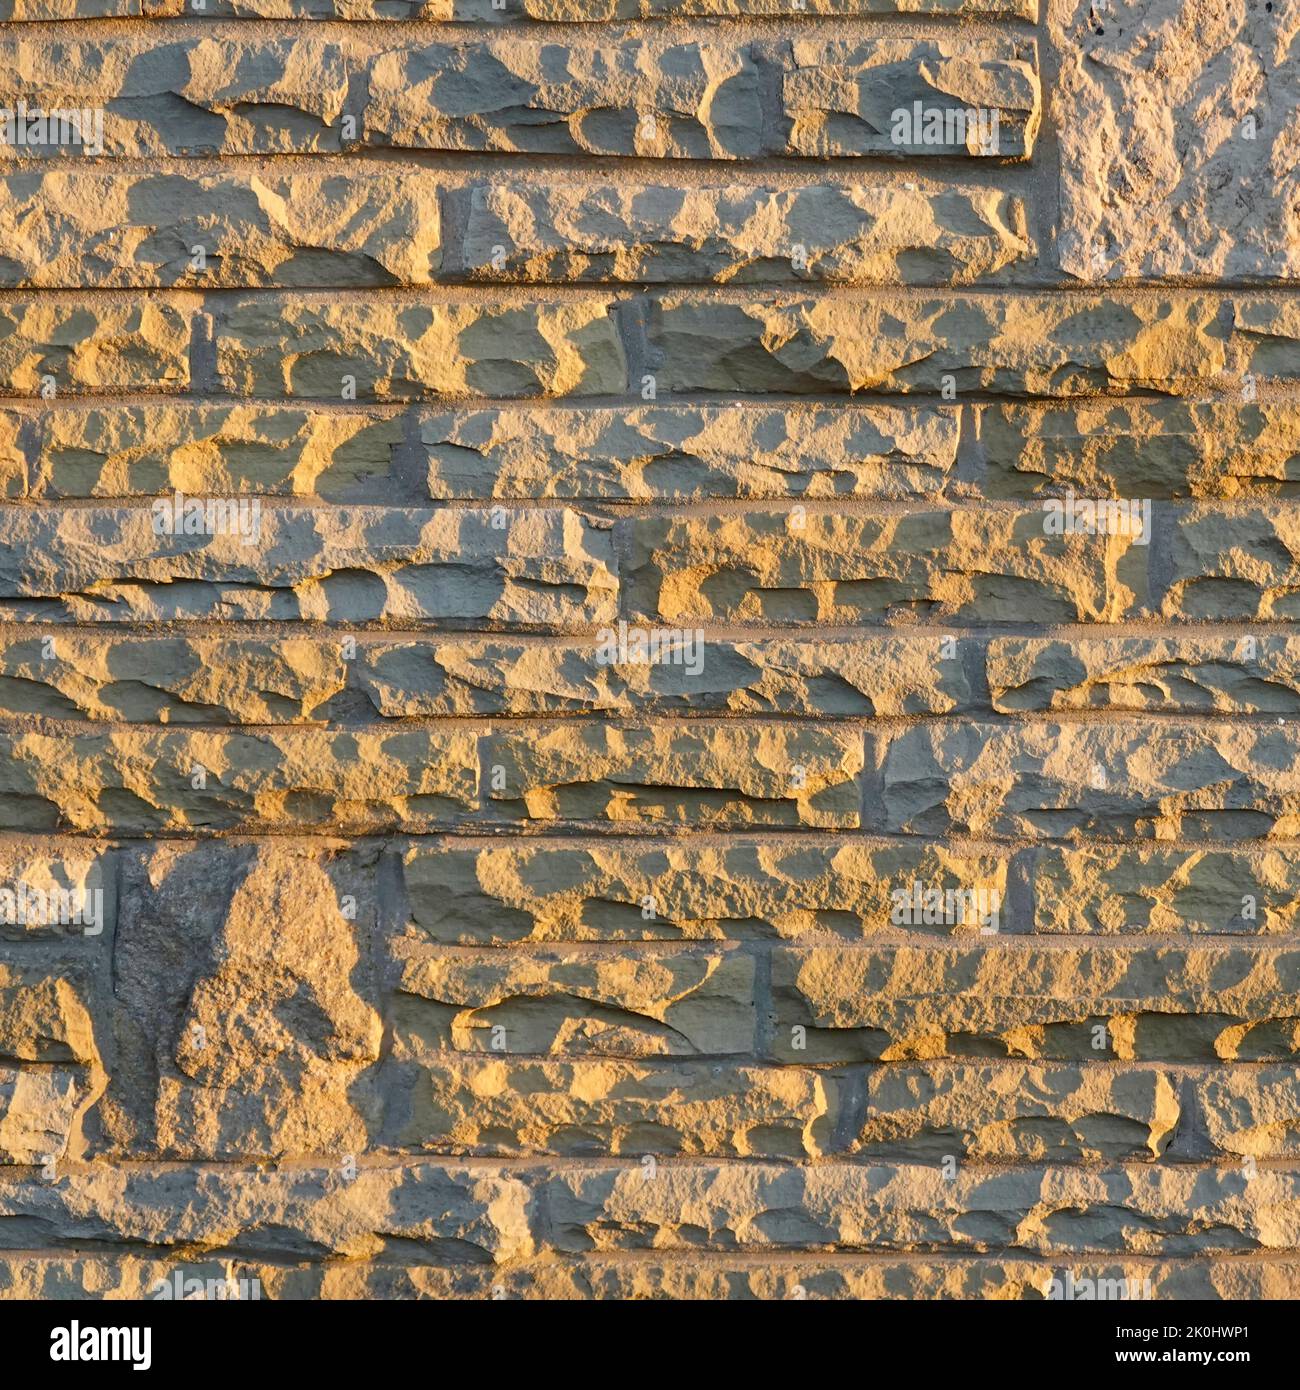 Sunshine on natural York stone blocks cut & dressed from redundant London paving slabs reused in external skin of house cavity wall Essex England UK Stock Photo